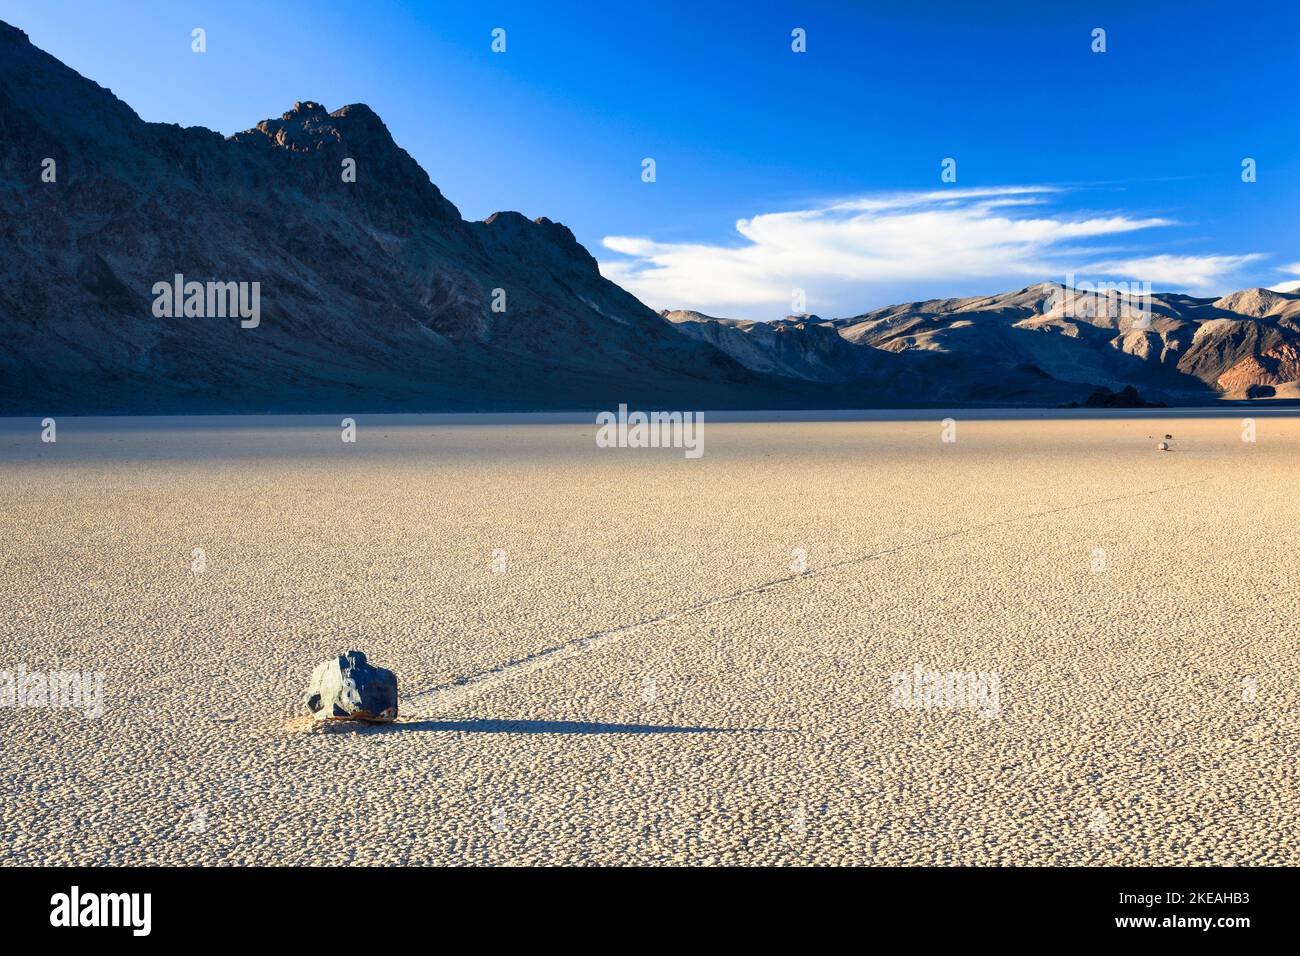 Mesquite Flats Sand Dunes, sanddunes with 'wandering stones', USA, California, Death Valley National Park Stock Photo